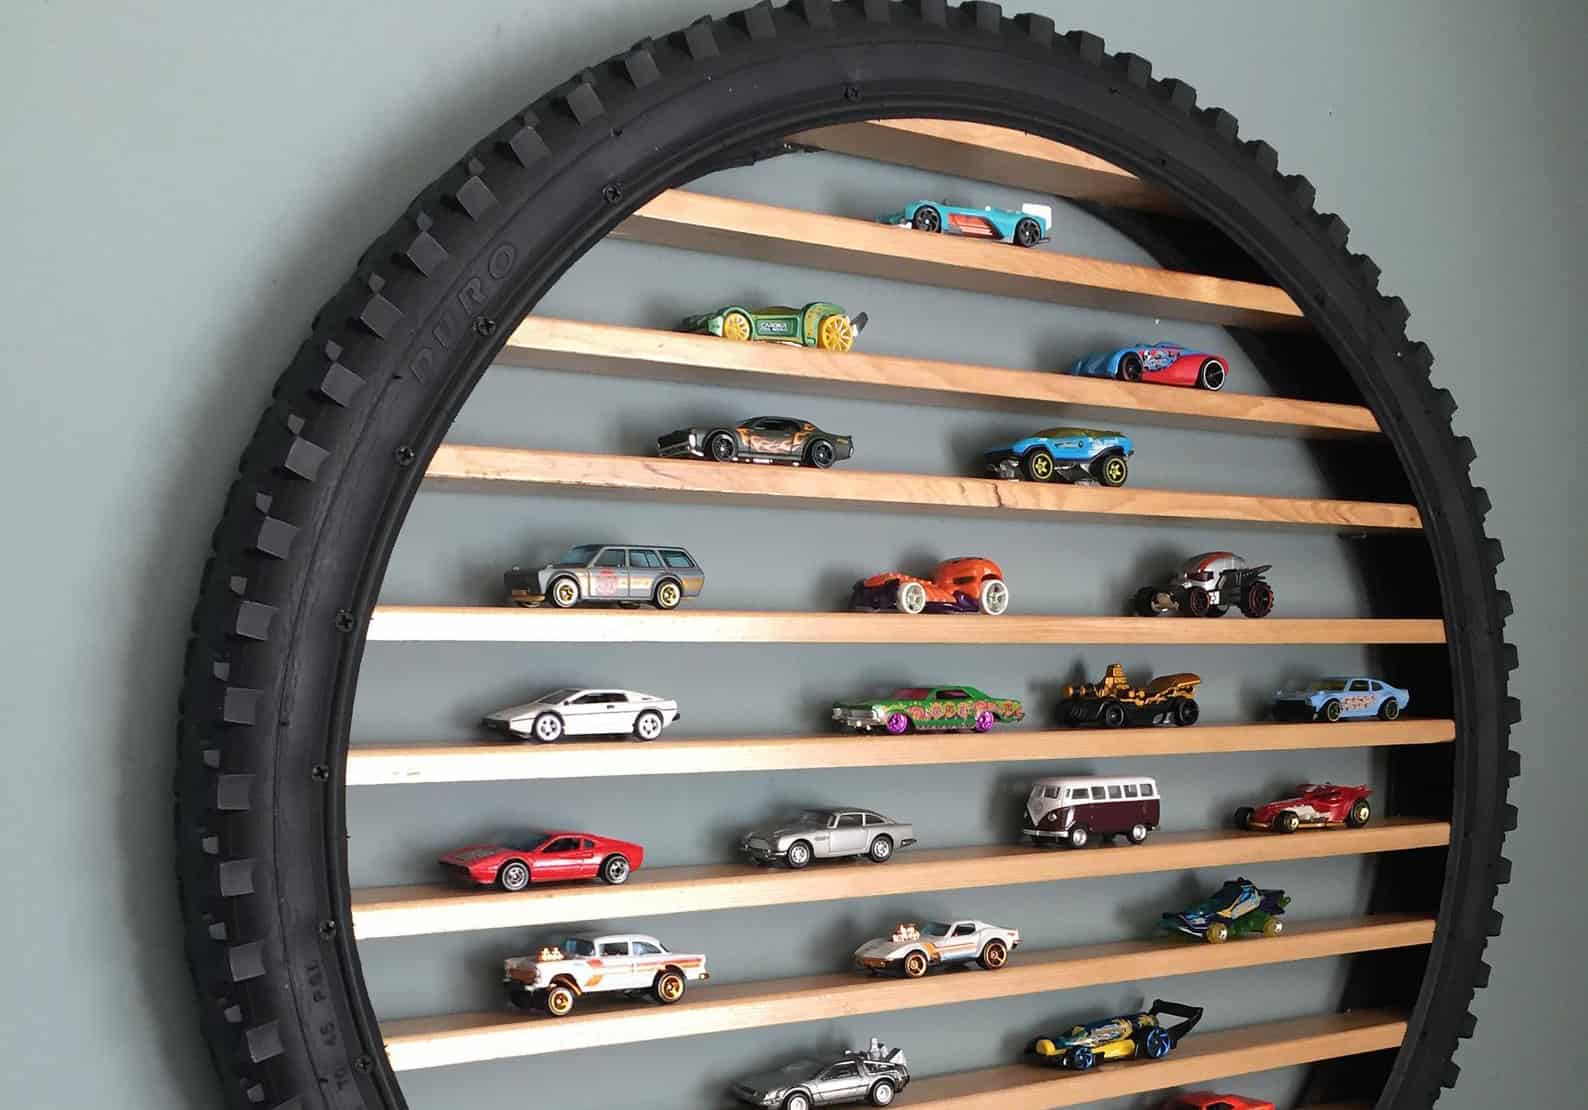 This Hot Wheels Tire Storage Display Is